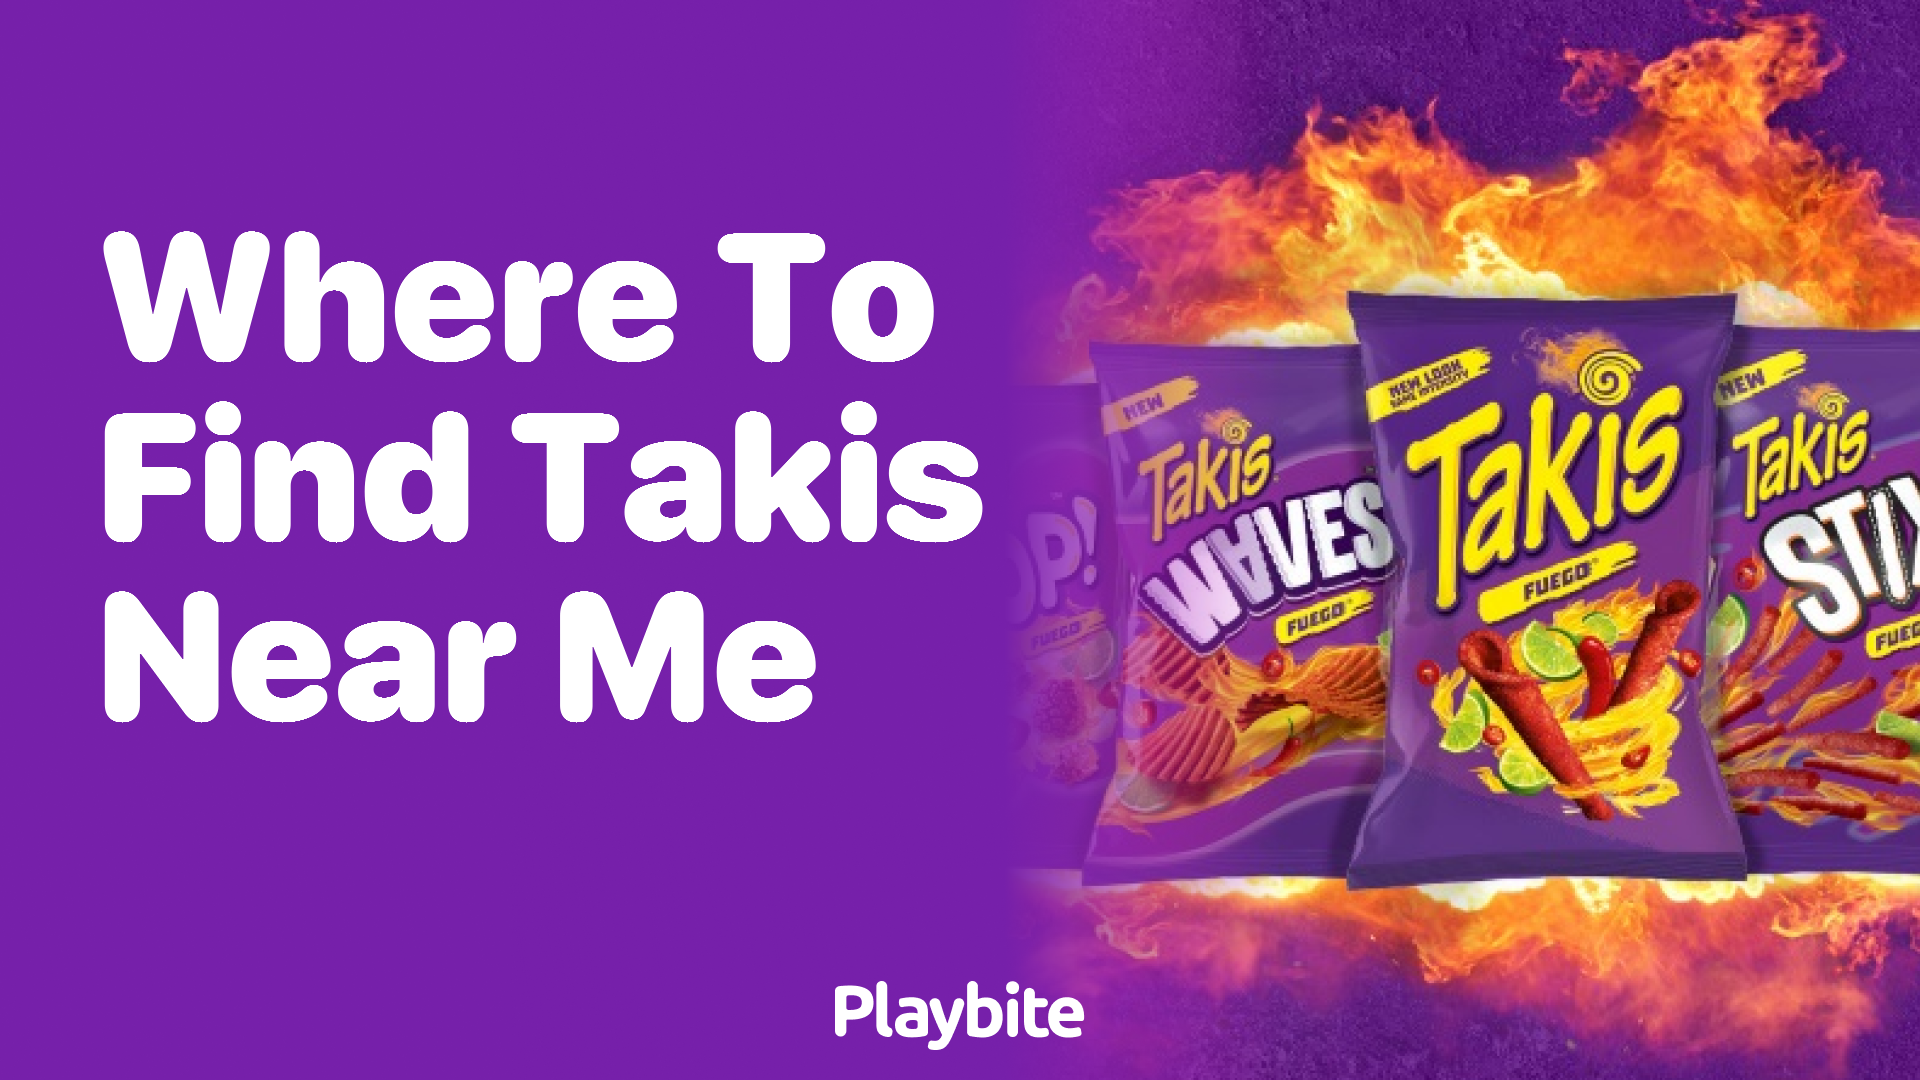 Where to Find Takis Near You